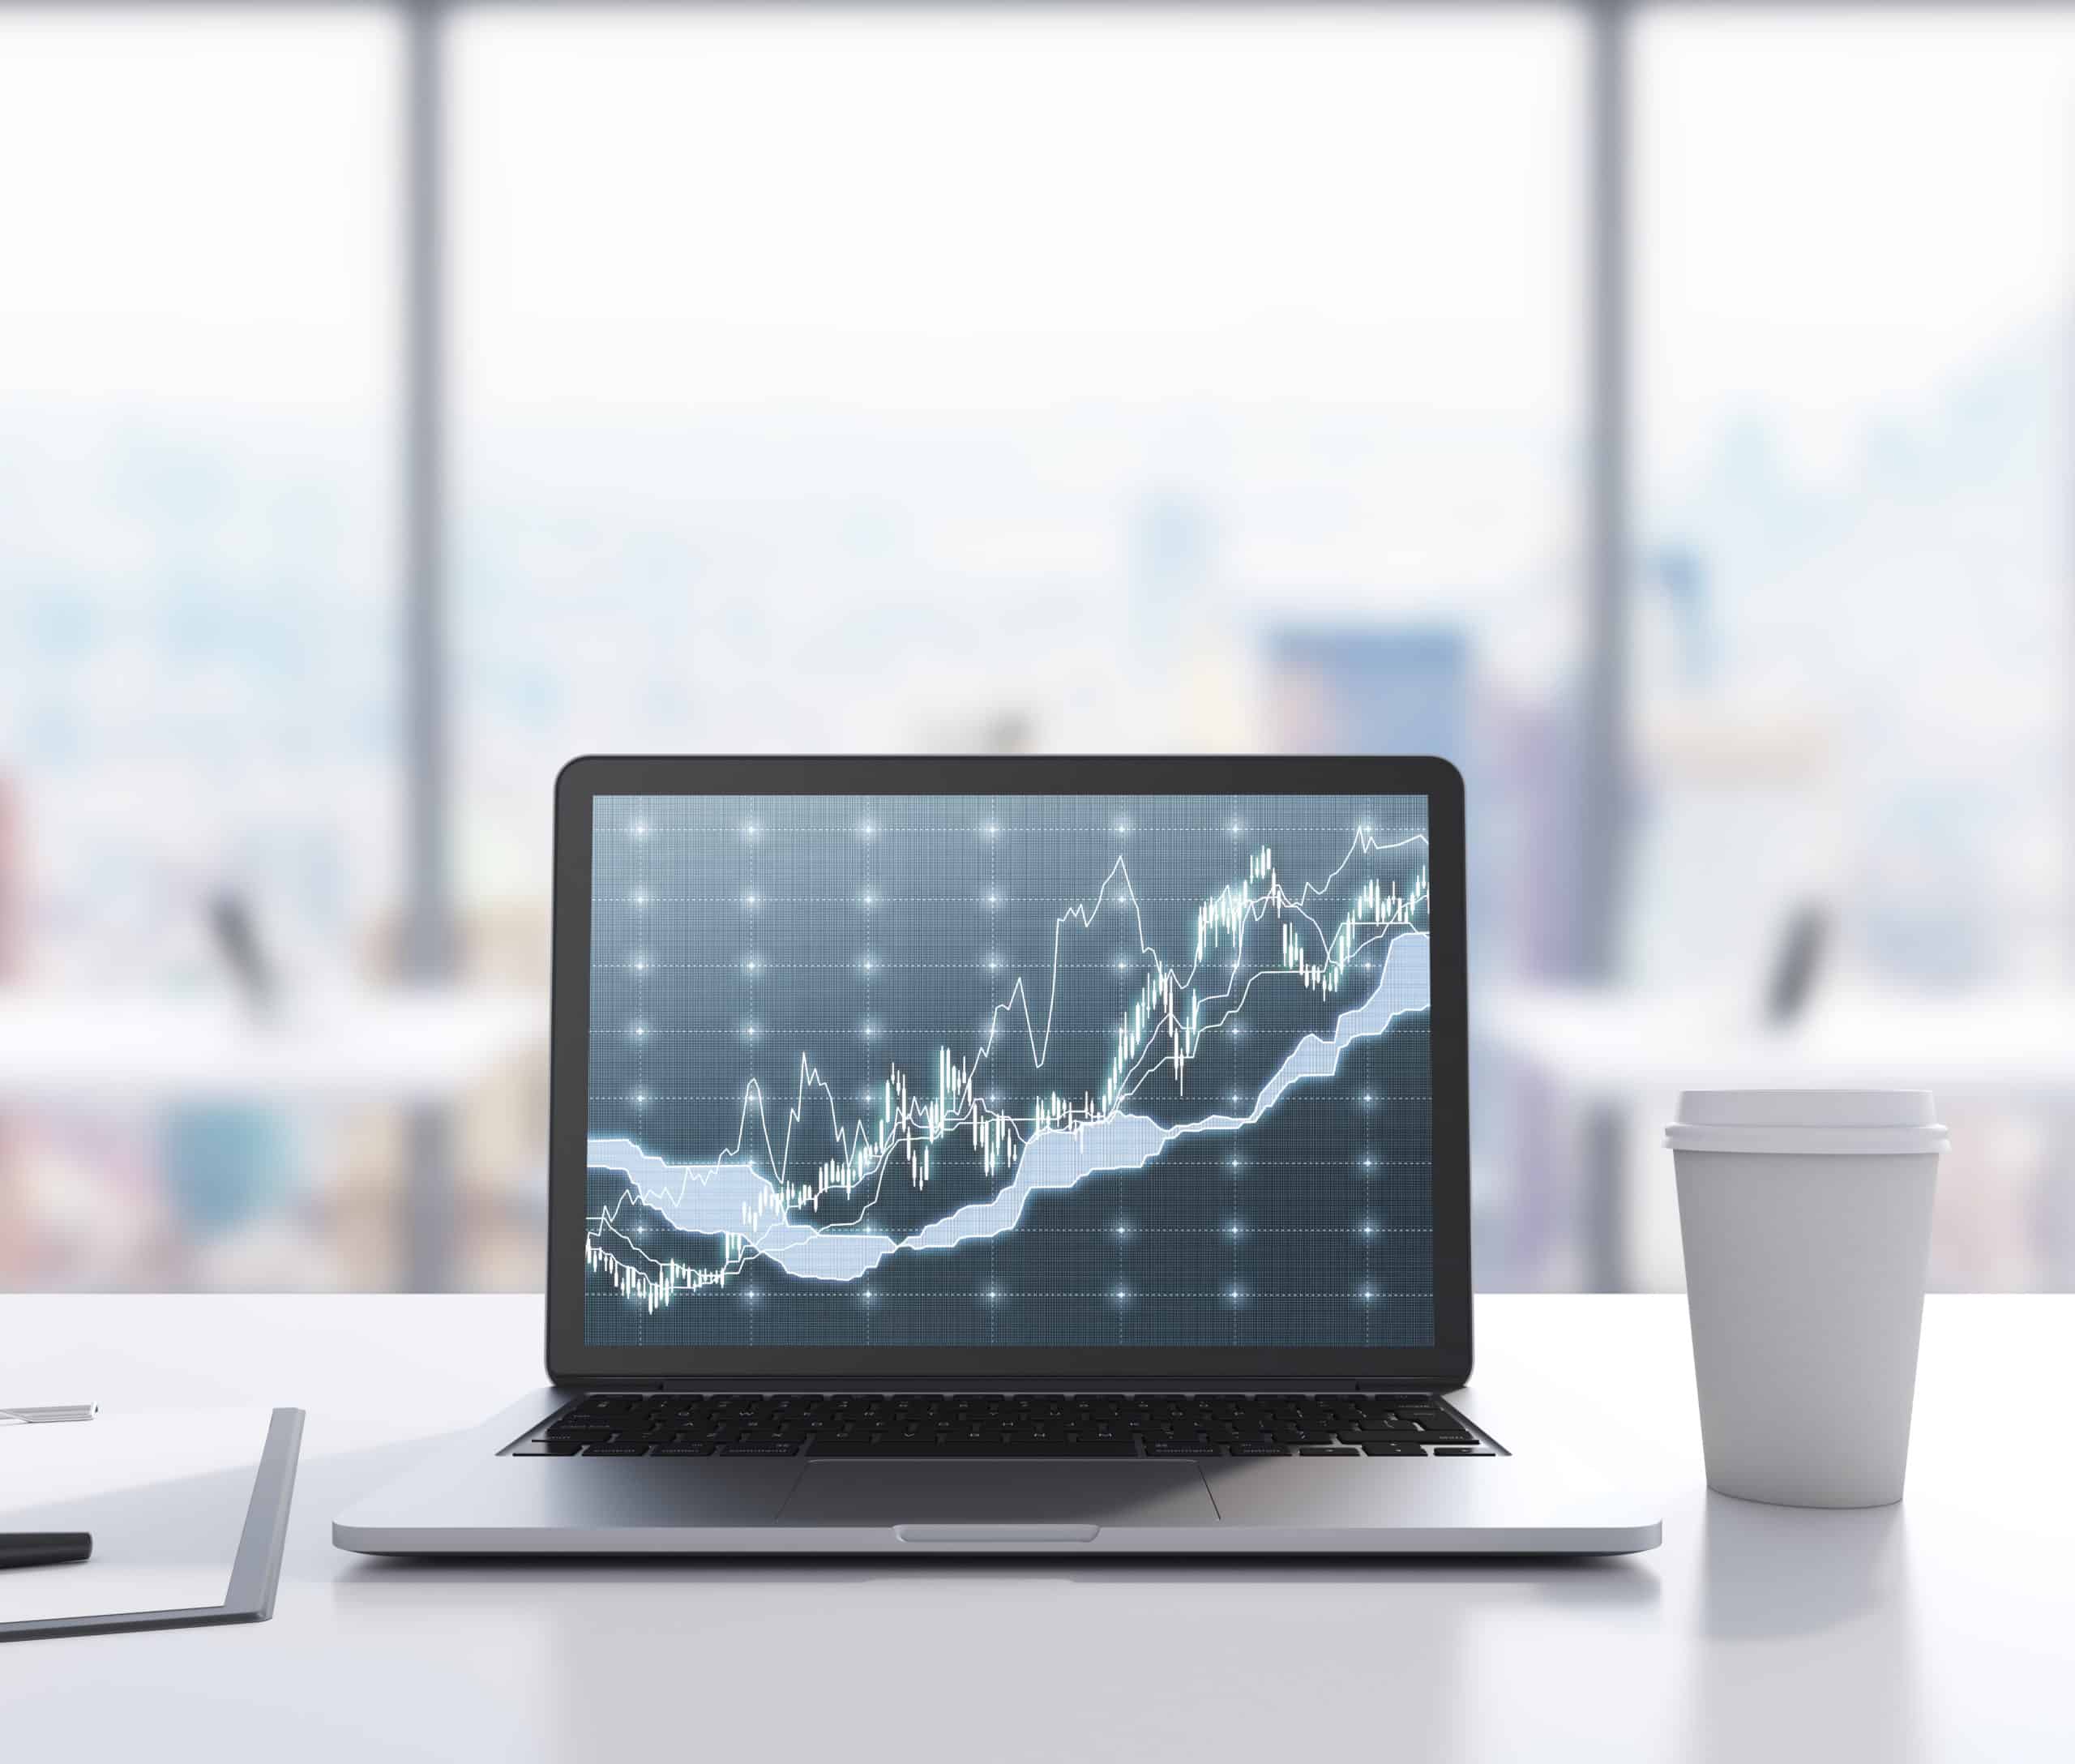 There are a laptop with forex chart on the screen, legal pad and a cup of coffee on the table. 3D rendering. Modern office with panoramic New York view in blur on the background. Toned image.